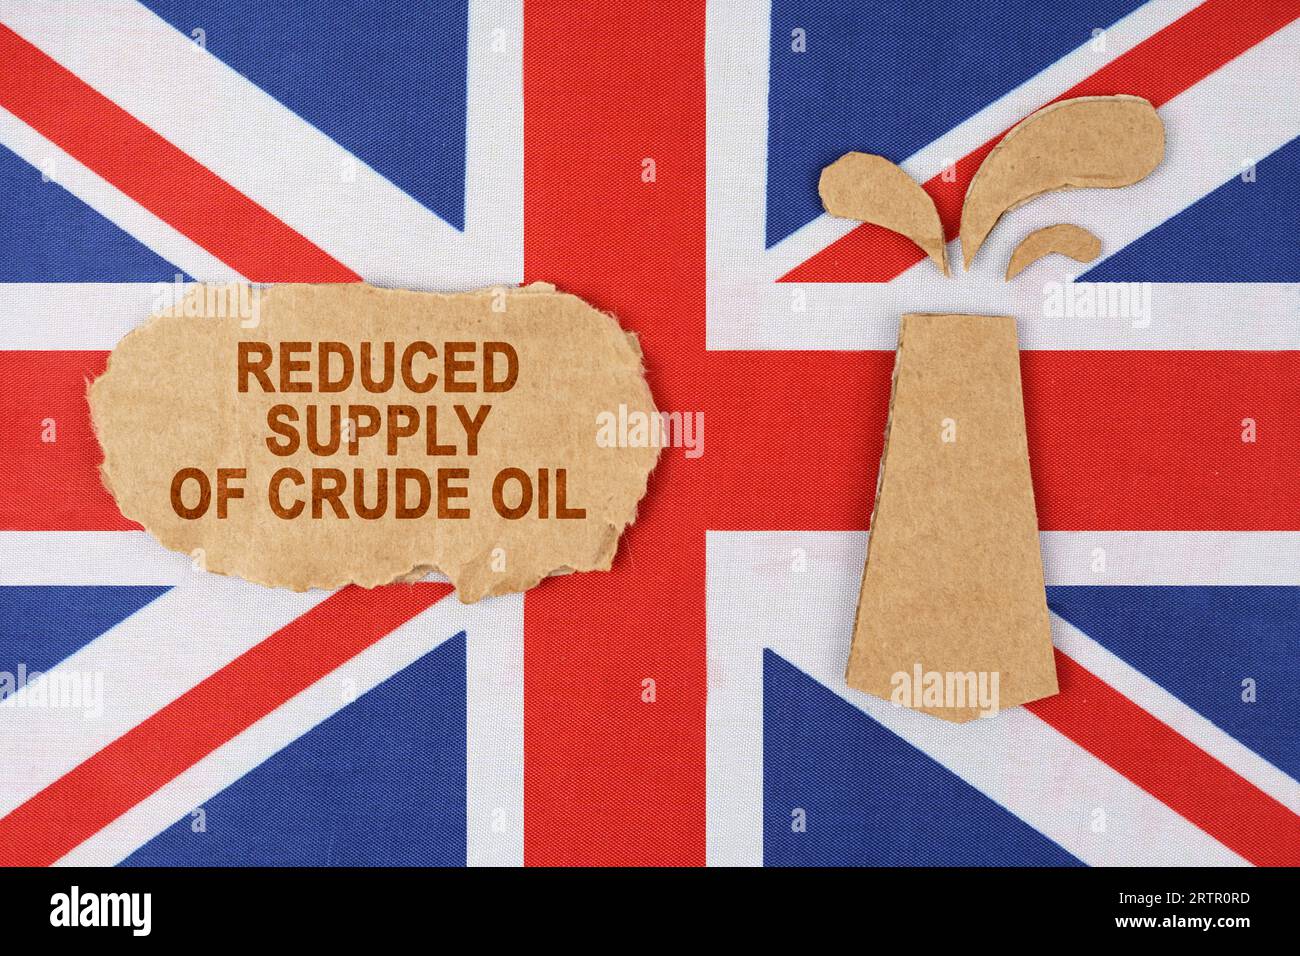 On the flag of Great Britain there is an oil rig cut out of cardboard and a sign with the inscription - reduced supply of crude oil. Stock Photo